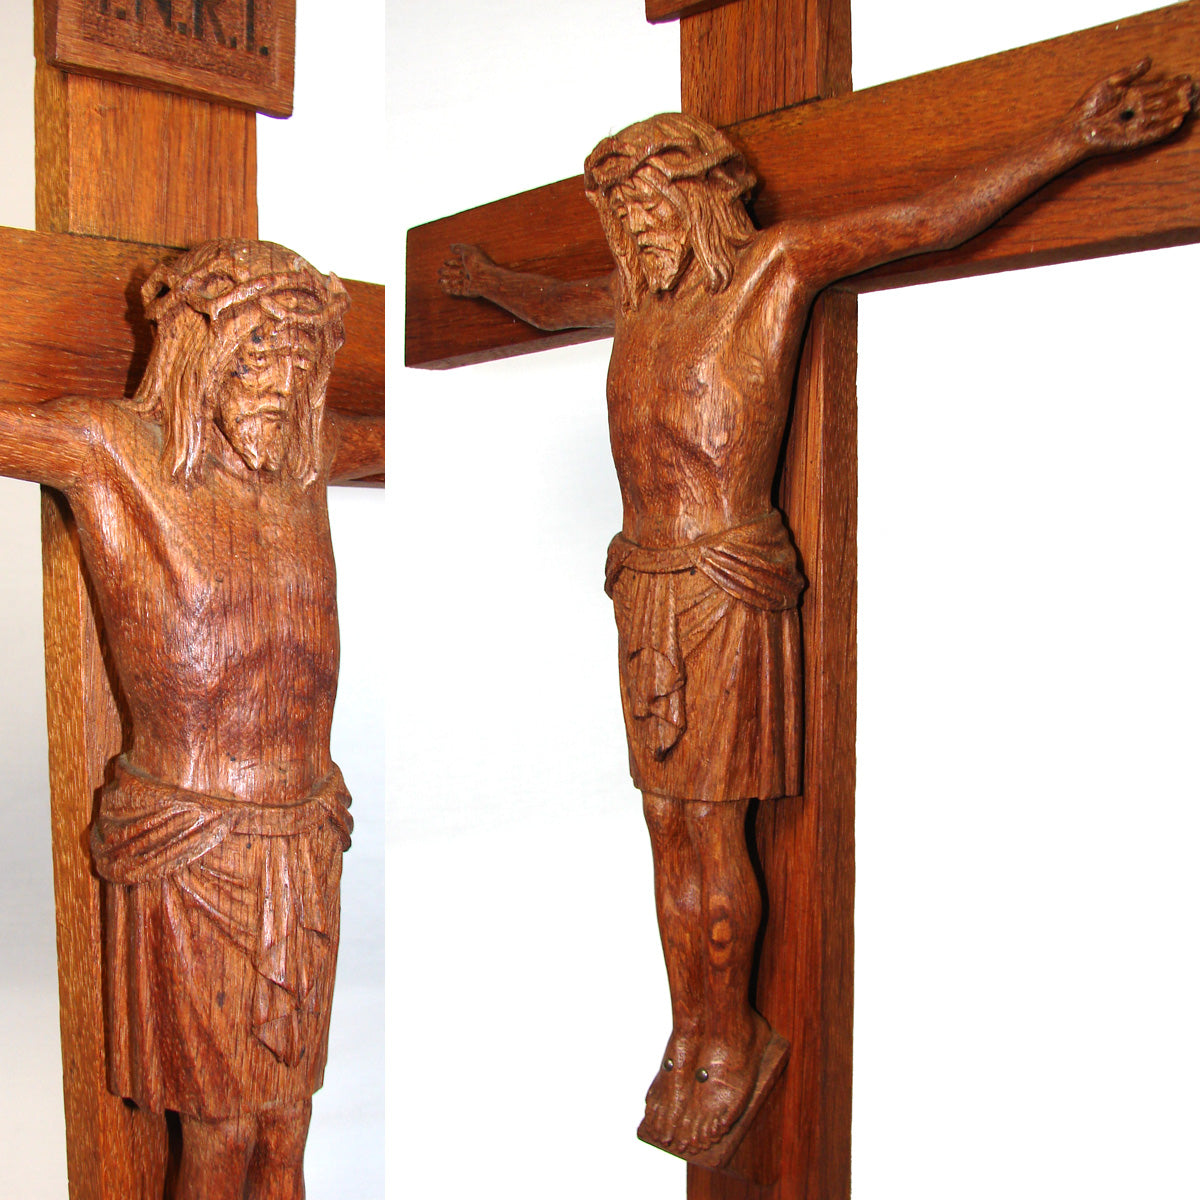 Antique French Carved Oak Religious Sculpture, Medieval Style Christ Corpus, 19.5" Cross